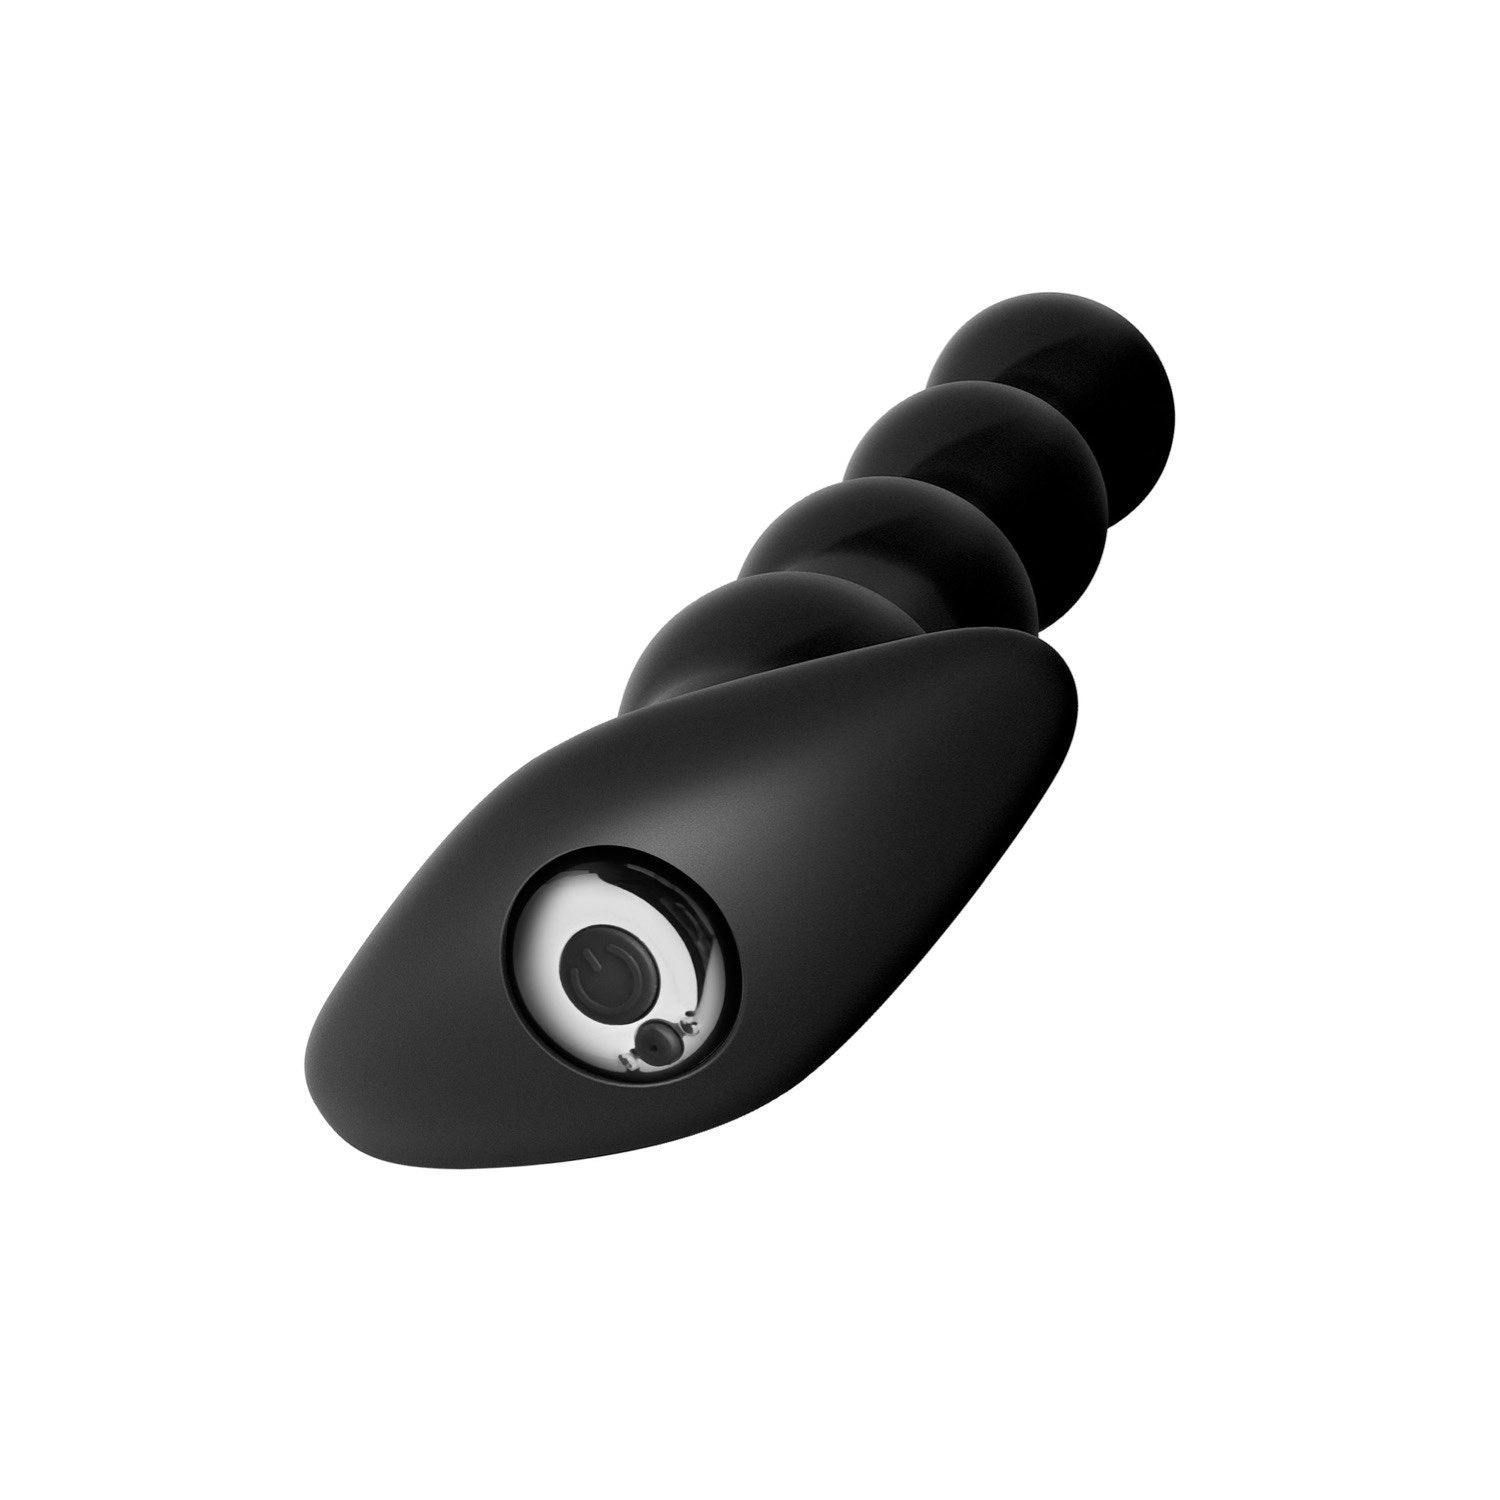 Anal Fantasy Elite Collection Rechargeable Anal Beads - Black 17 cm USB Rechargeable Vibrating Anal Beads by Pipedream